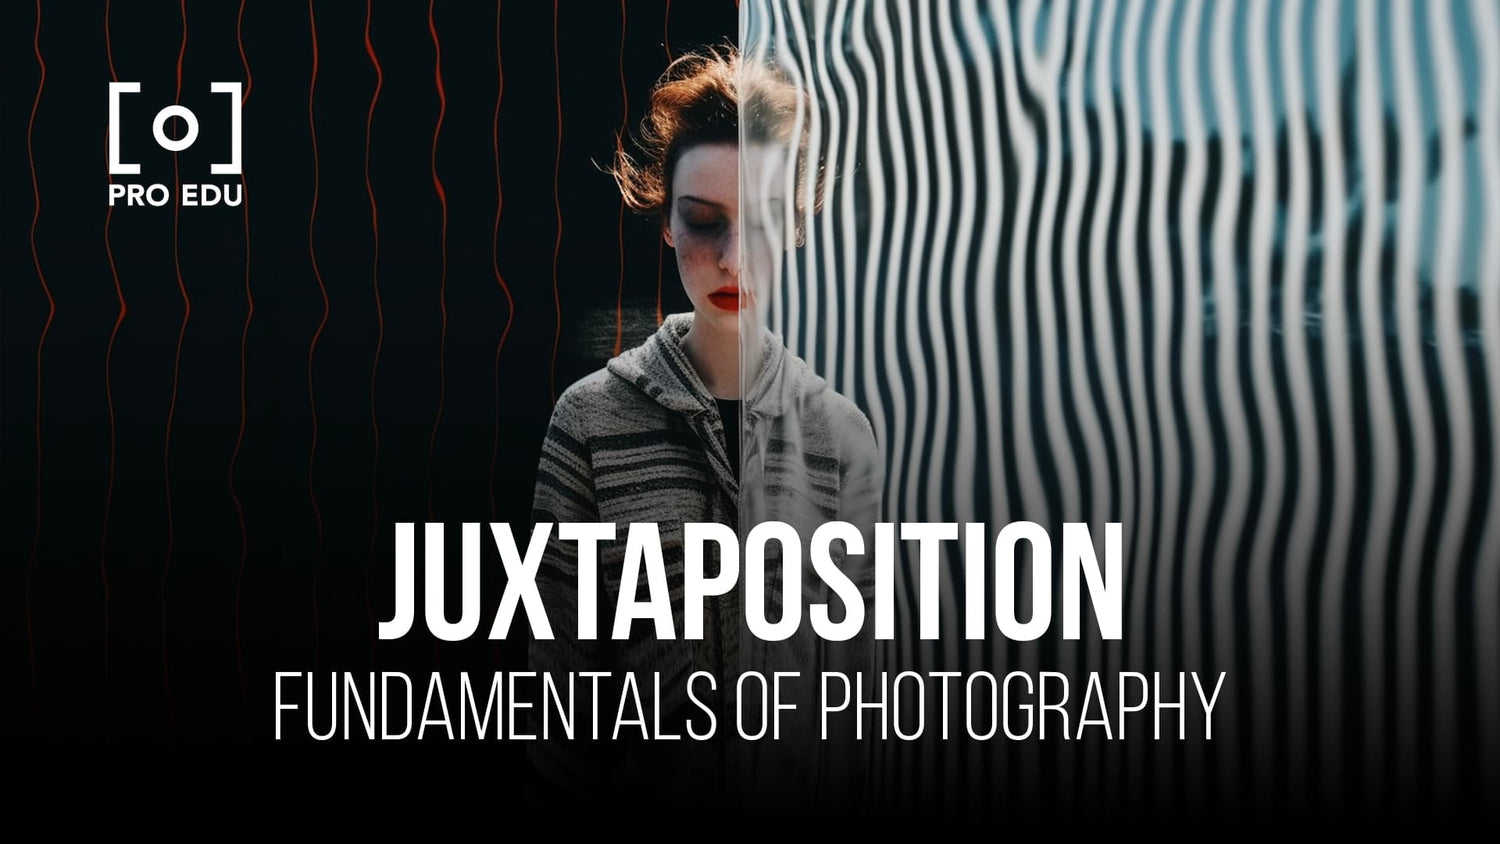 Creating compelling images with the technique of juxtaposition in photography